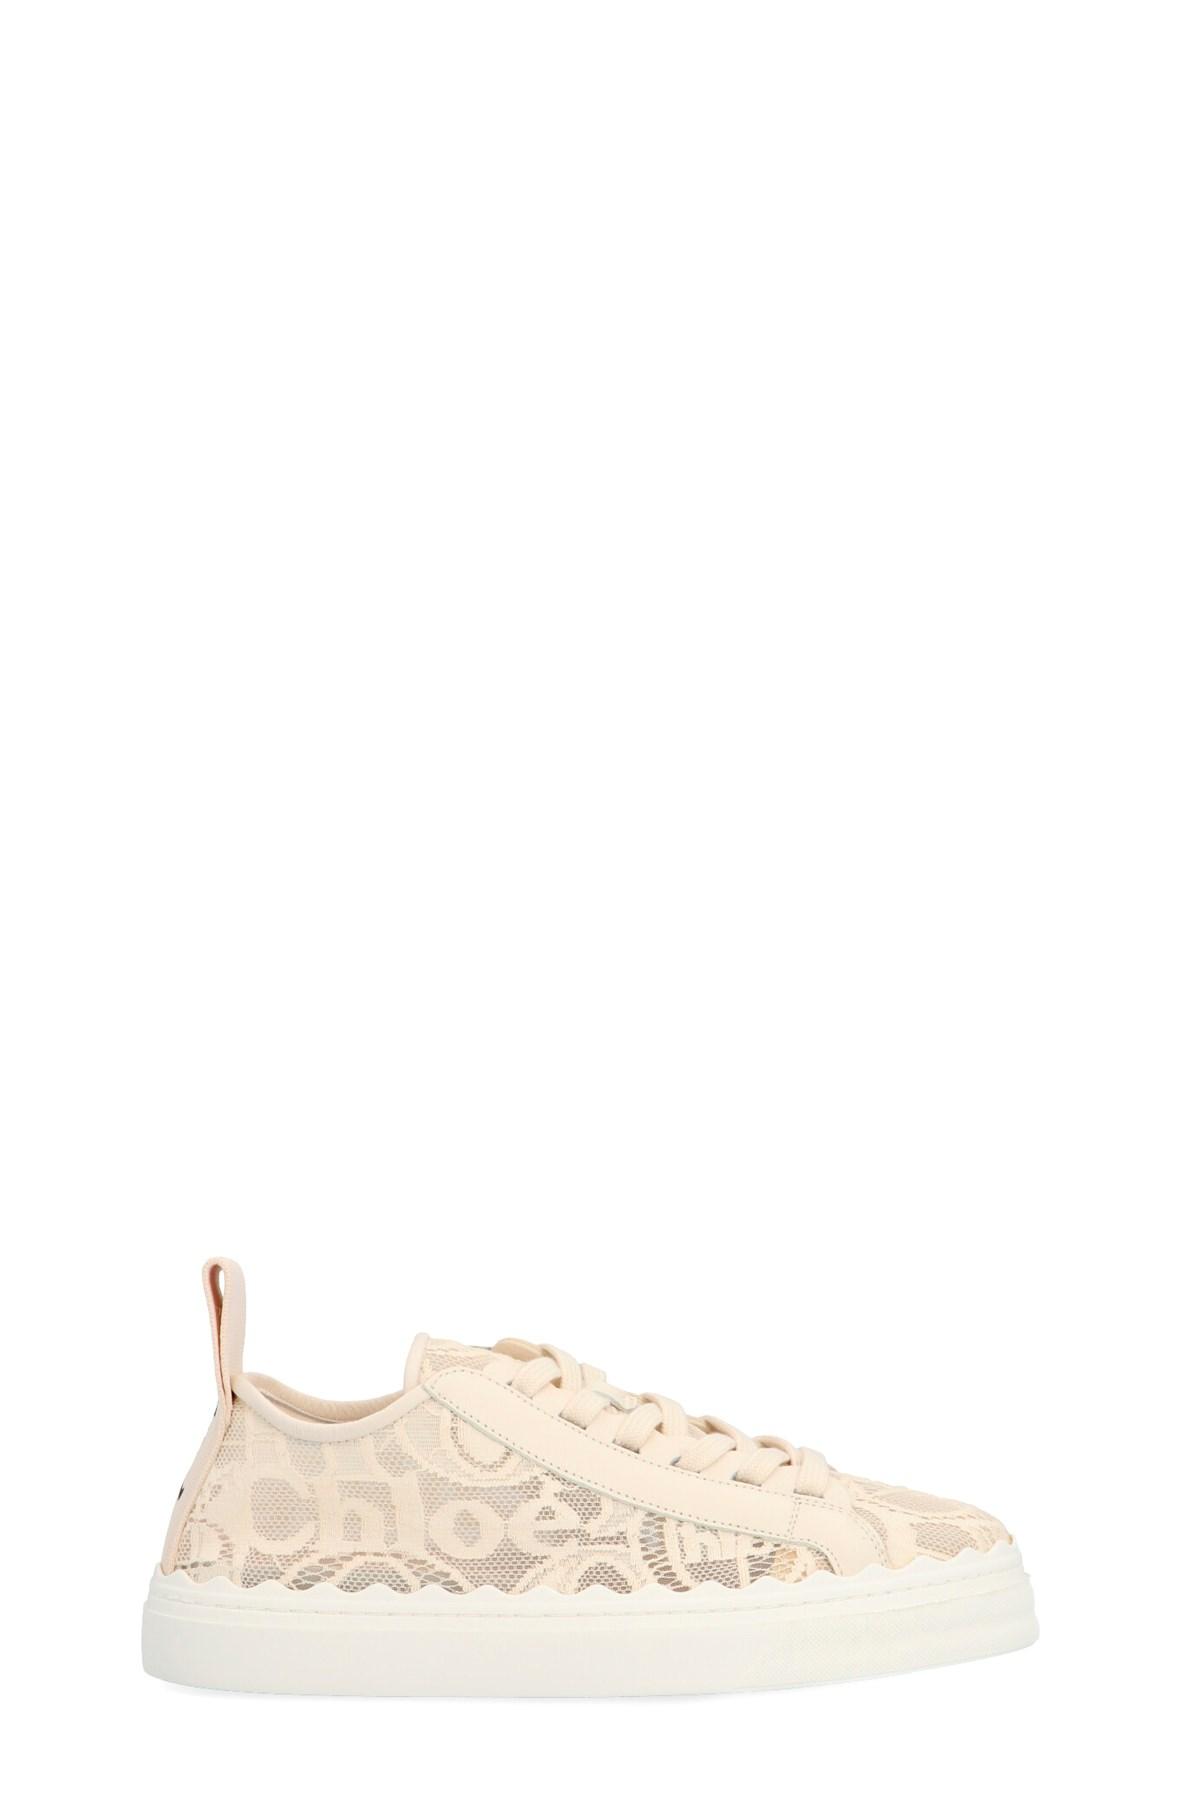 Chloé Women's Mesh Lace Low-top Sneakers - Mild Beige in Natural - Lyst